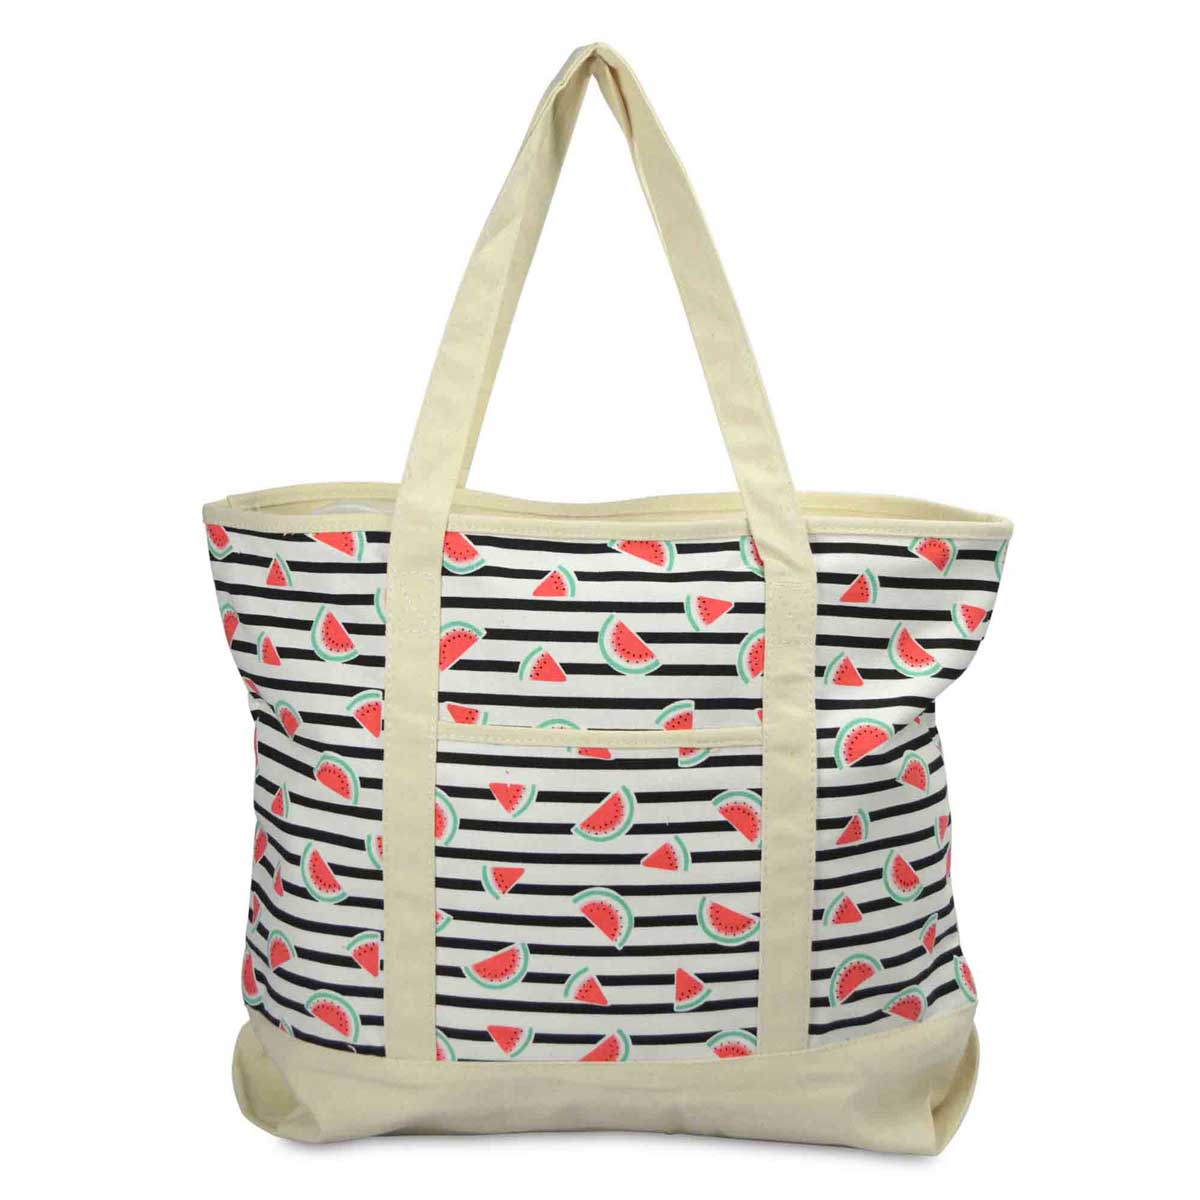 Dalix 22" Soft Canvas Tote Bag Special Patterns Collection